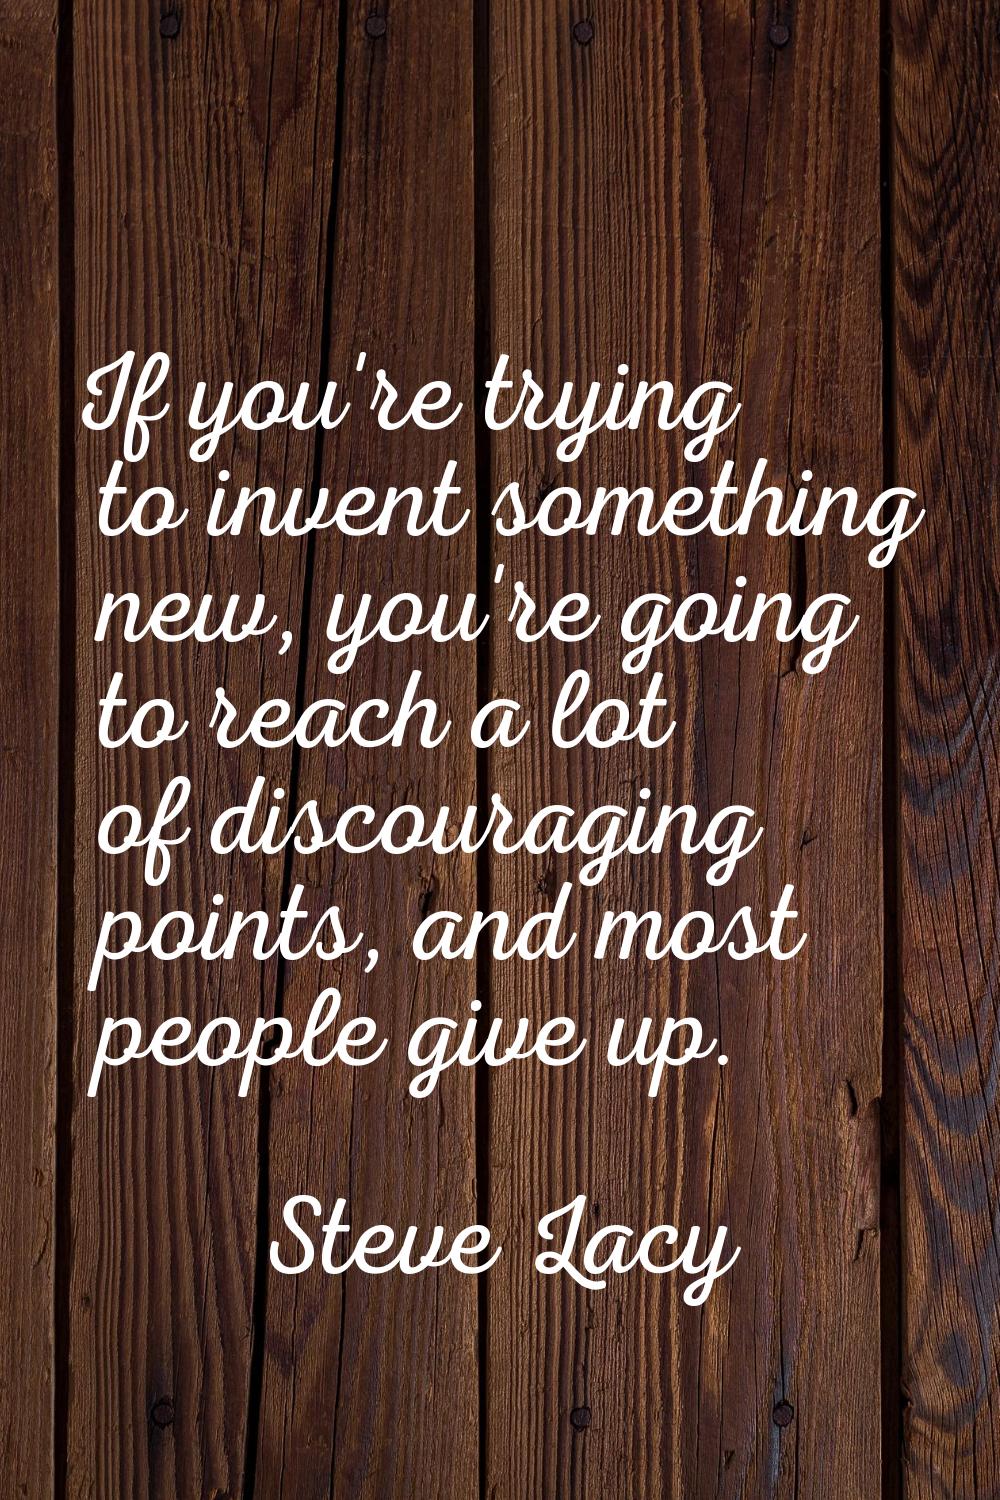 If you're trying to invent something new, you're going to reach a lot of discouraging points, and m